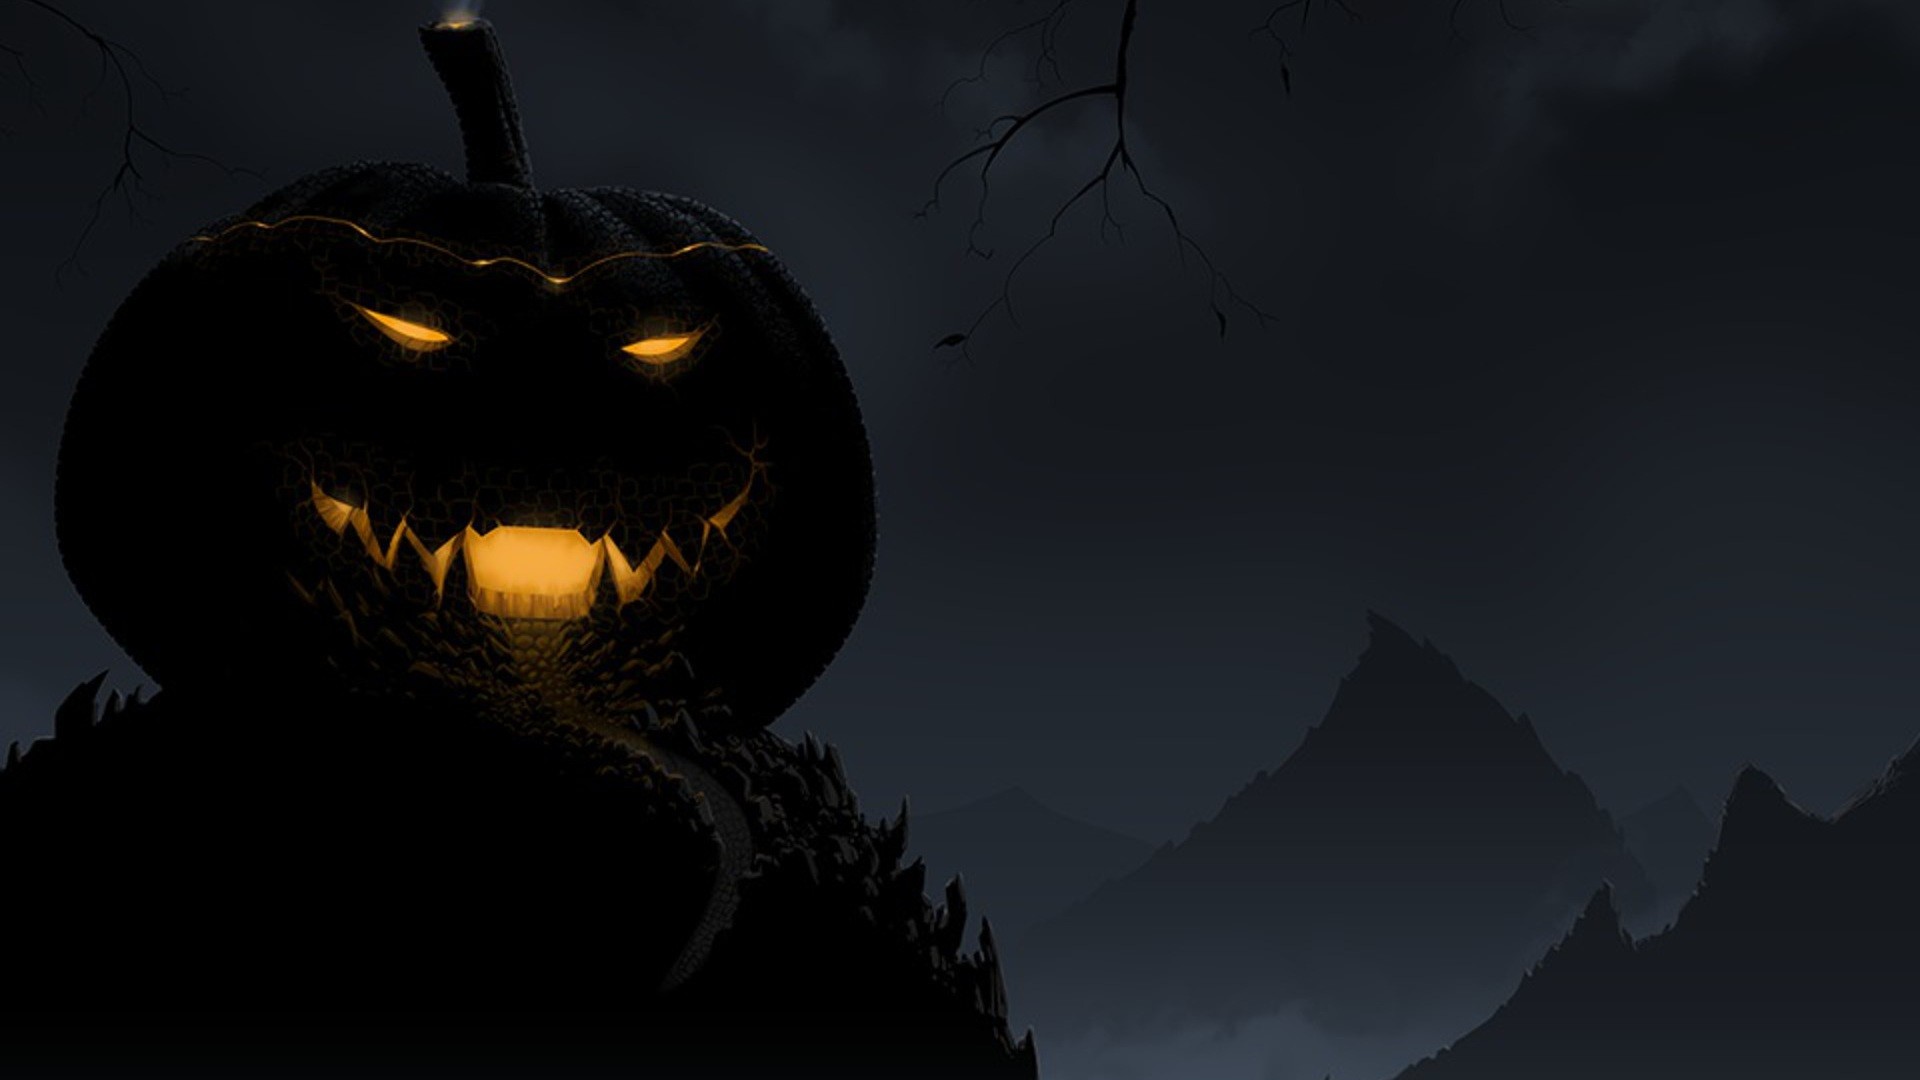 Cool Halloween Backgrounds – Wallpapers Browse. Cool Halloween Backgrounds Wallpapers Browse